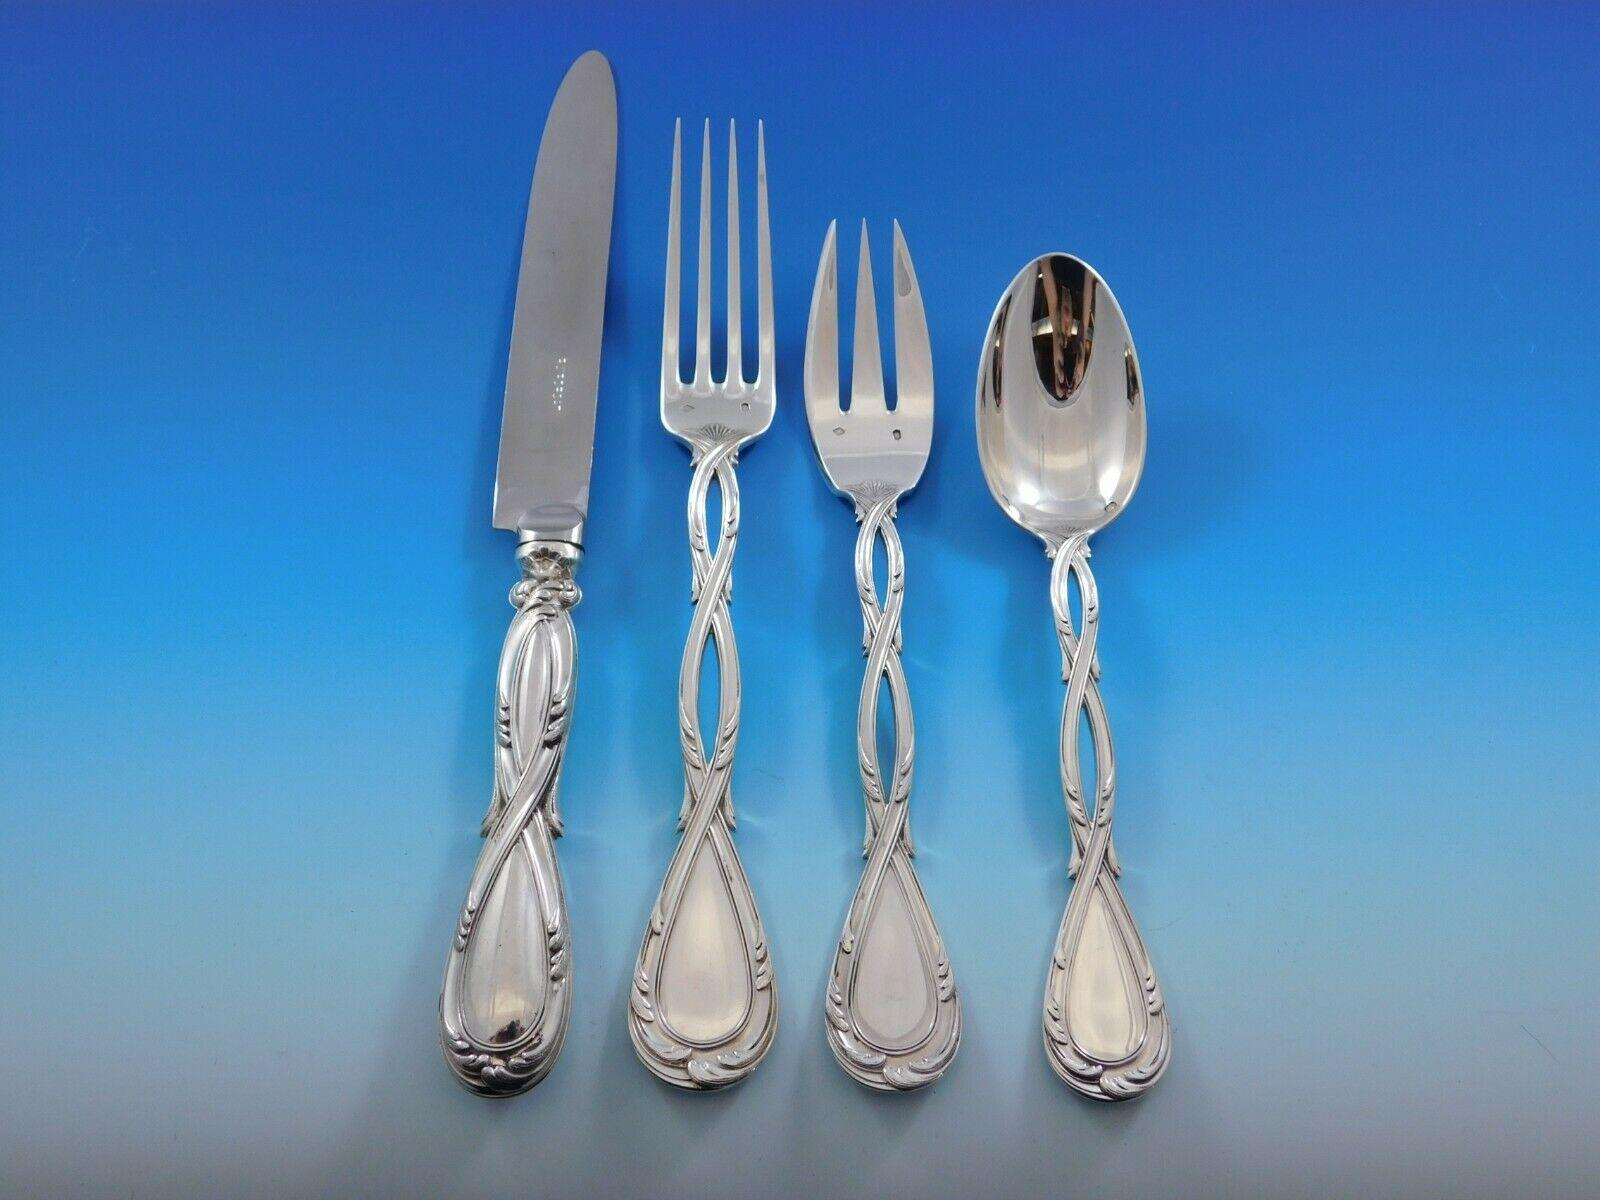 Royal by Puiforcat sterling silver Flatware set, 20 pieces. This set includes:

4 dinner knives, 10